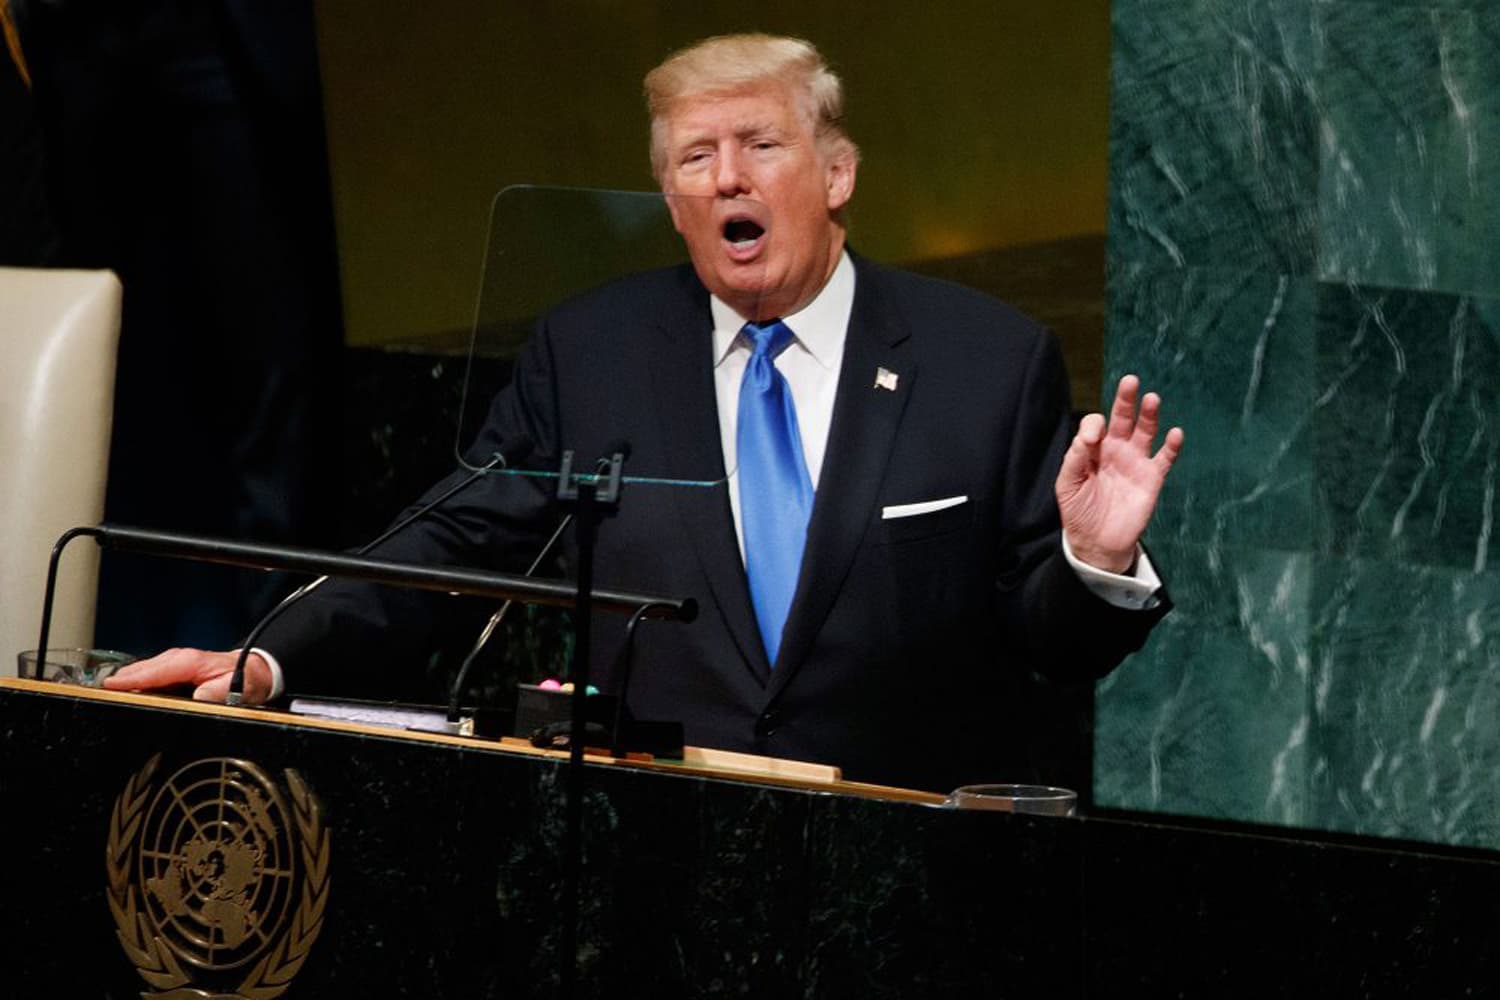 President Donald Trump speaks to the United Nations General Assembly, Tuesday, Sept. 19, 2017, in New York. (Evan Vucci/AP)